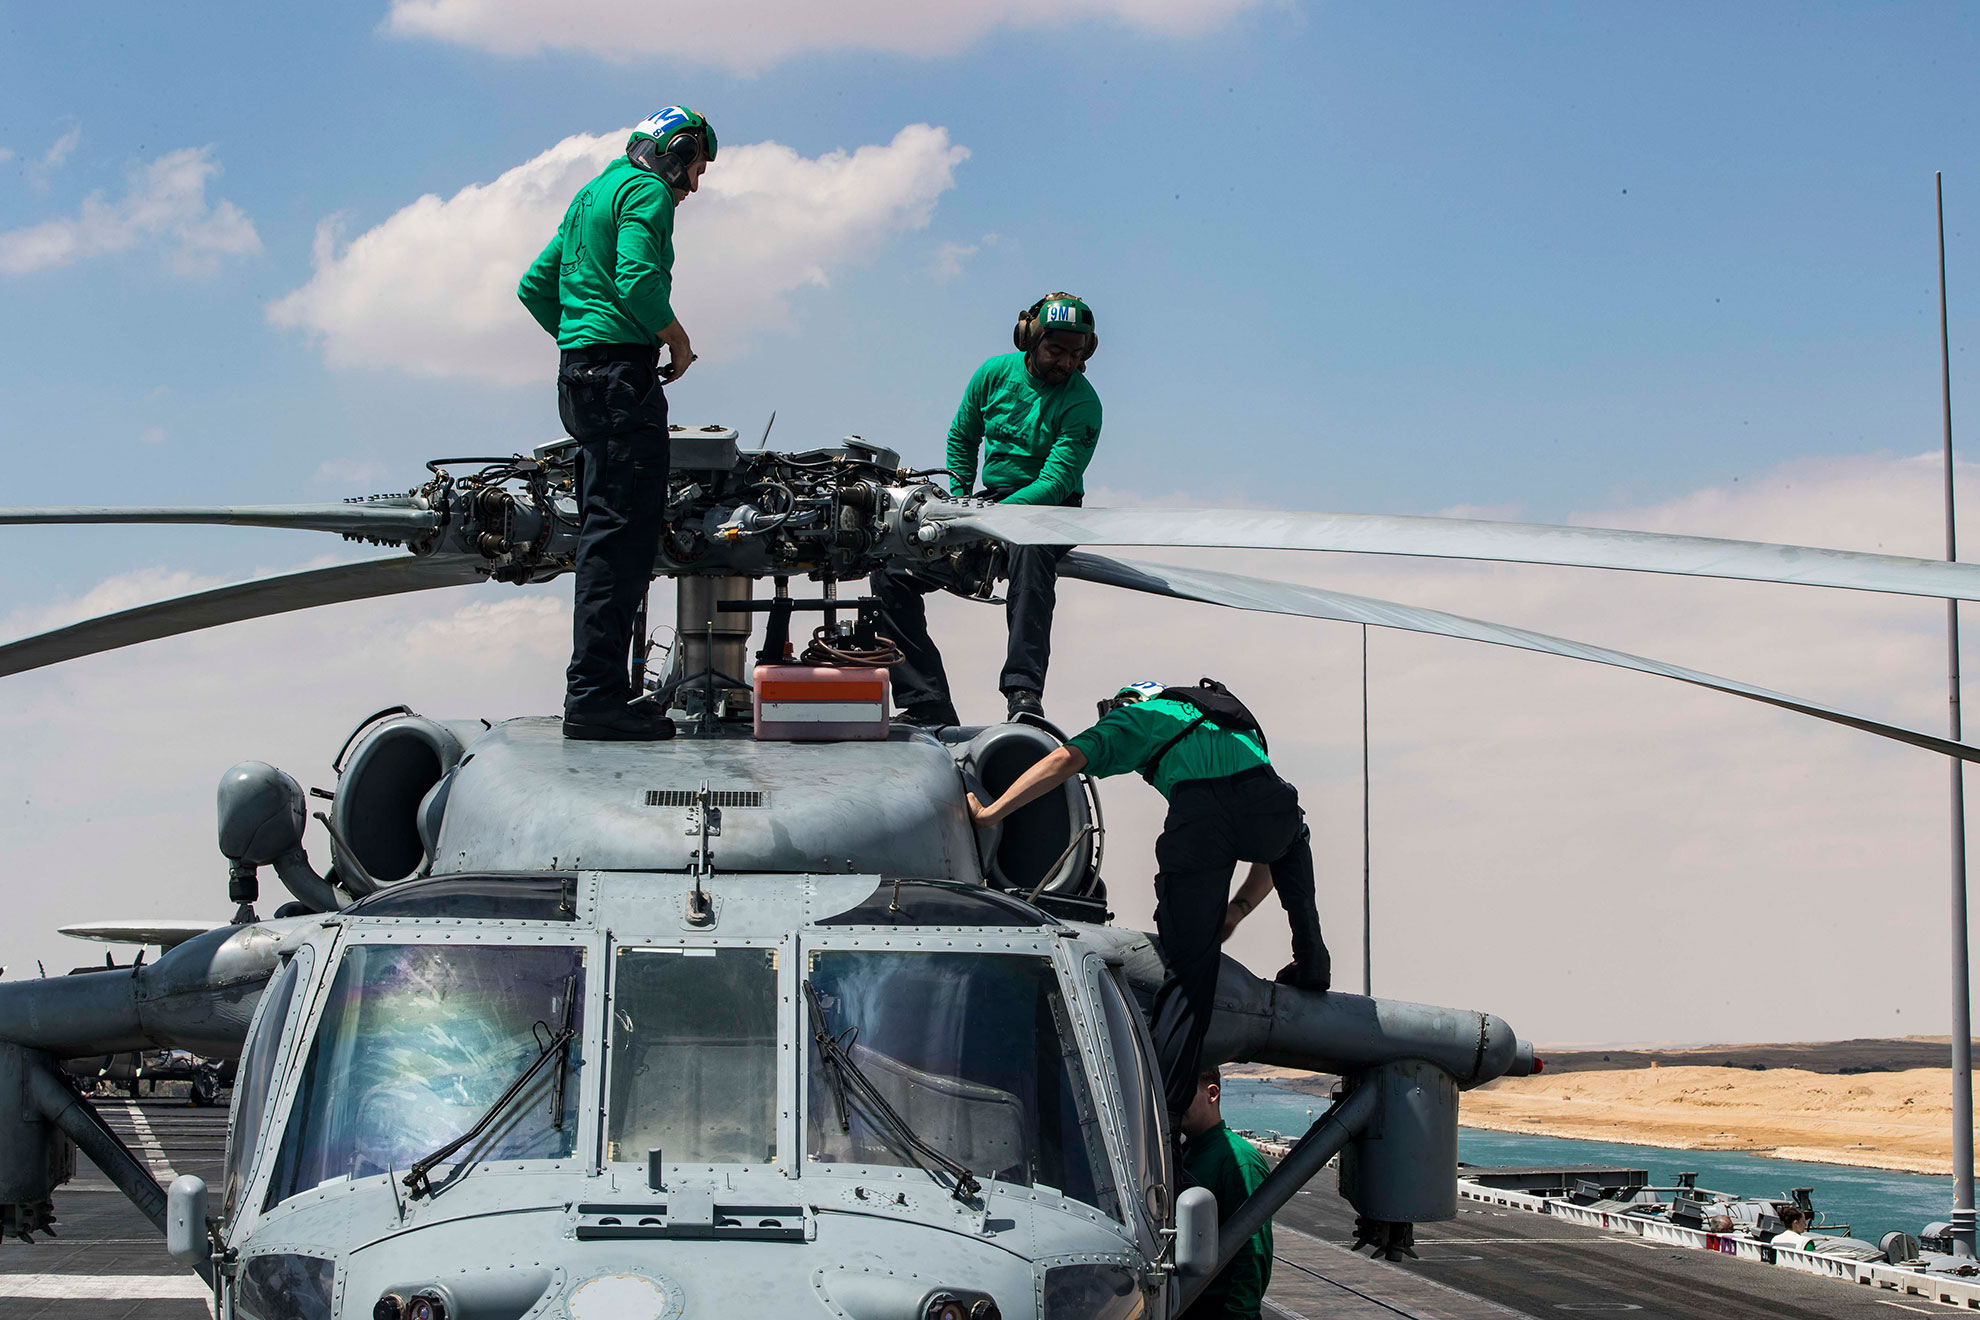 Suez Canal (May 9, 2019) Sailors perform maintenance on an MH-60S Sea Hawk helicopter from the "Nightdippers" of Helicopter Sea Combat Squadron (HSC) 5 on the flight deck of the Nimitz-class aircraft carrier USS Abraham Lincoln (CVN 72) as the ship transits the Suez Canal. The Abraham Lincoln Carrier Strike Group (ABECSG) is deployed to the U.S. Central Command area of responsibility in order to defend American forces and interests in the region. With Abraham Lincoln as the flagship, deployed strike group assets include staffs, ships and aircraft of Carrier Strike Group 12 (CSG 12), Destroyer Squadron 2 (DESRON 2), USS Leyte Gulf (CG 55) and Carrier Air Wing 7 (CVW 7); as well as the Spanish navy lvaro de Bazan-class frigate ESPS Mendez Nñez (F 104) -- U.S. Navy photo by MCS 2nd Class Zachary Hale. -